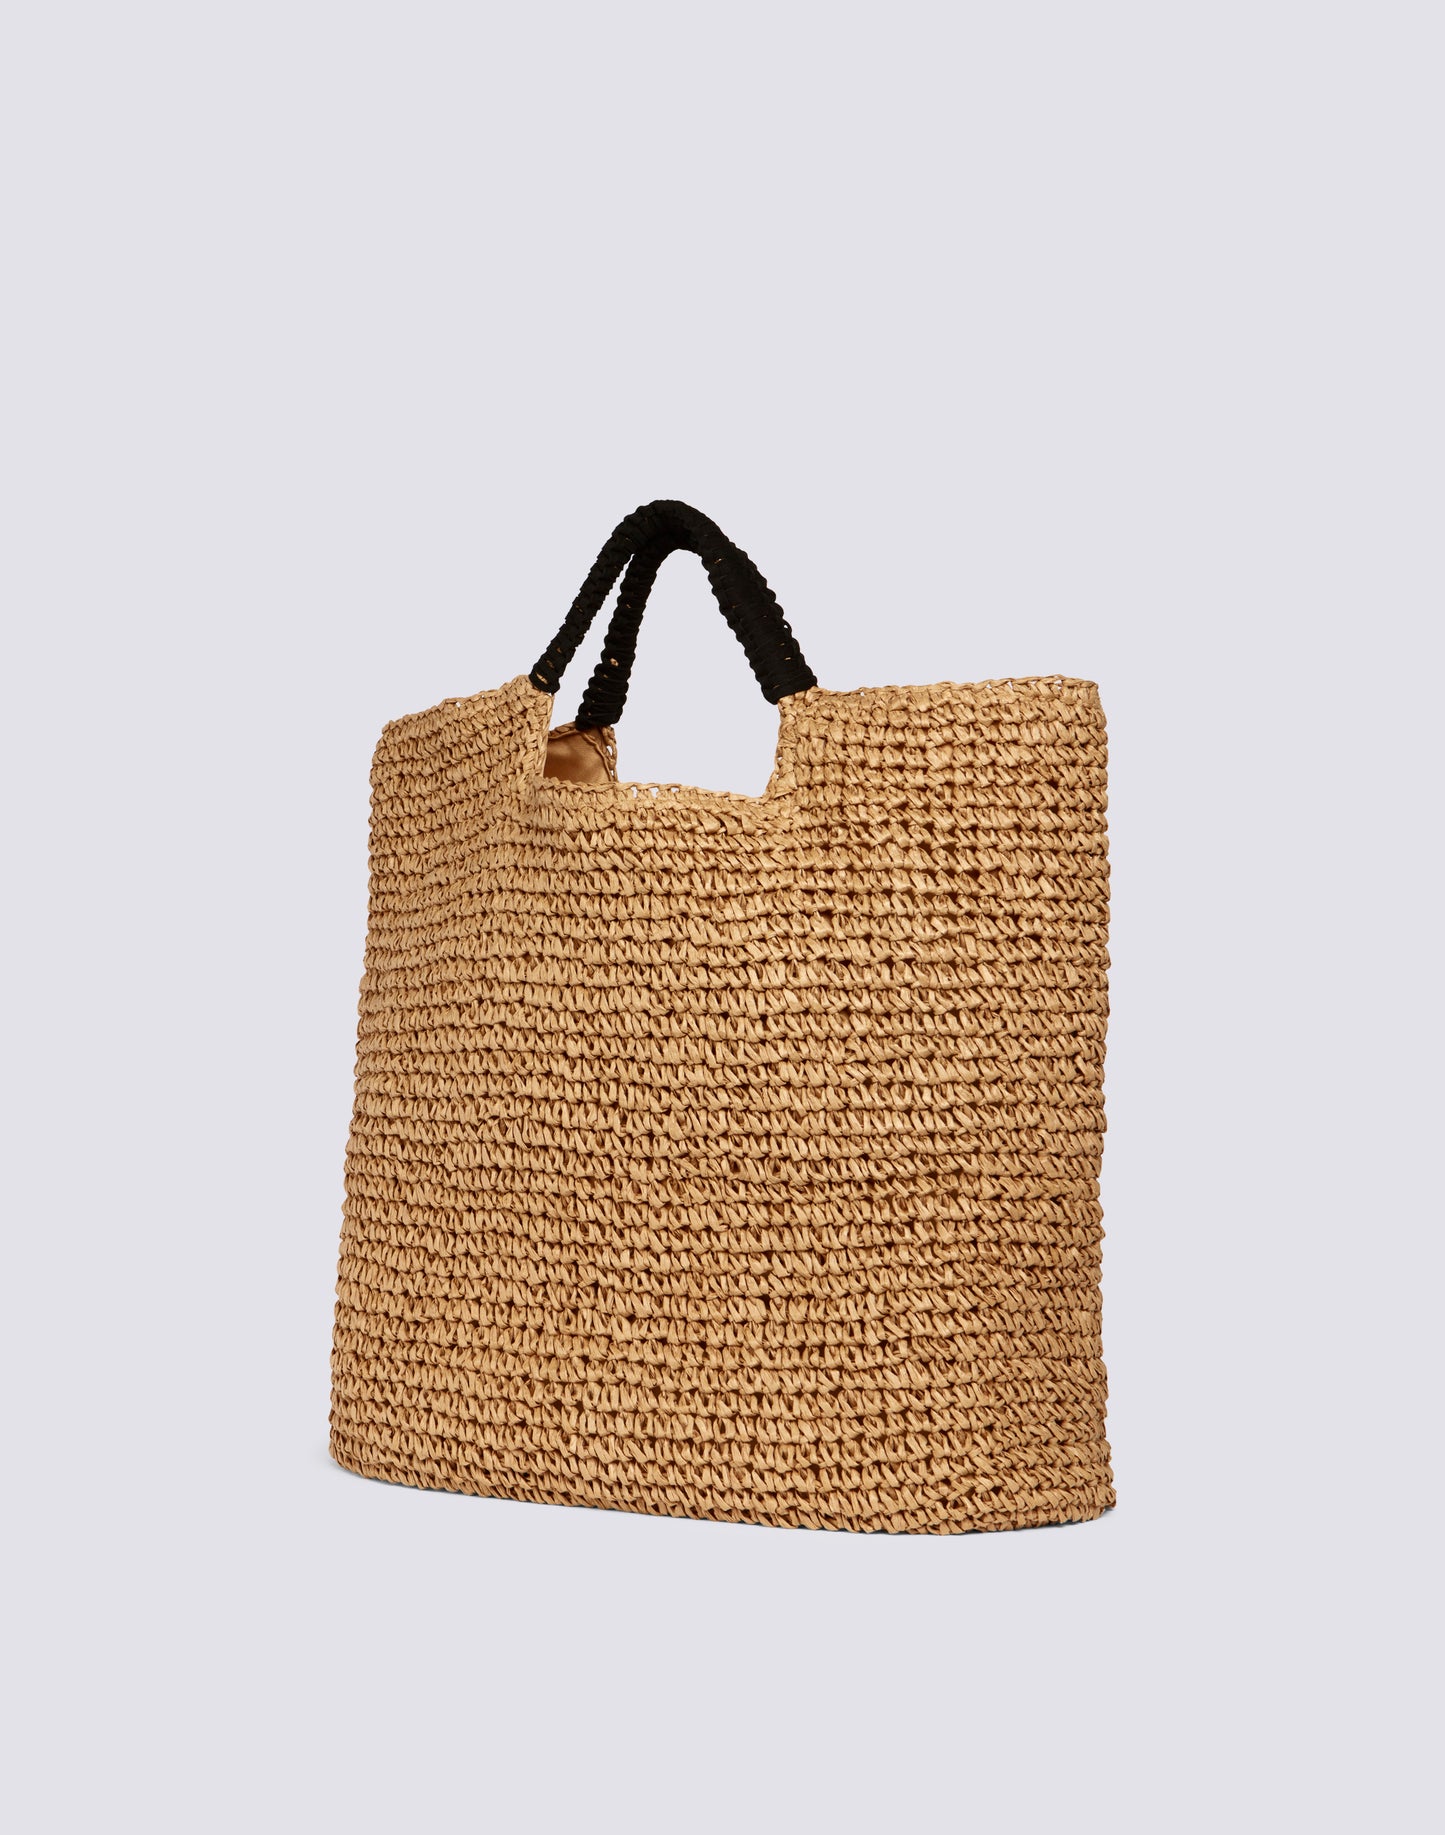 LARGE WOVEN PAPER STRAW BAG